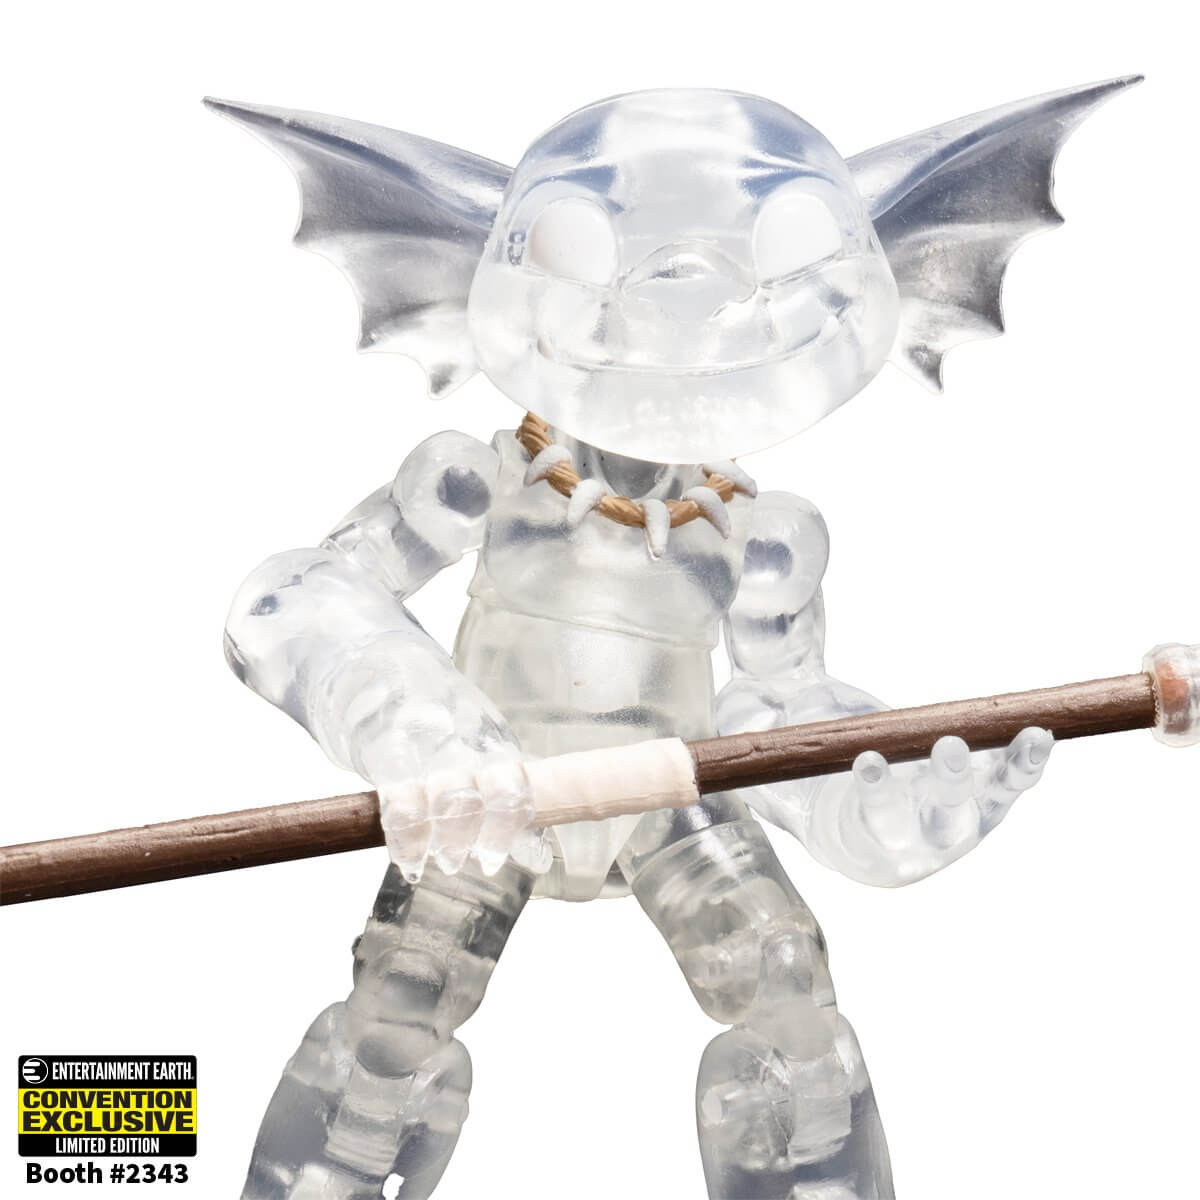 Plunderlings Drench up close smiling, holding spear Arctic Clear Variant 1:12 Scale Action Figure - Convention Exclusive